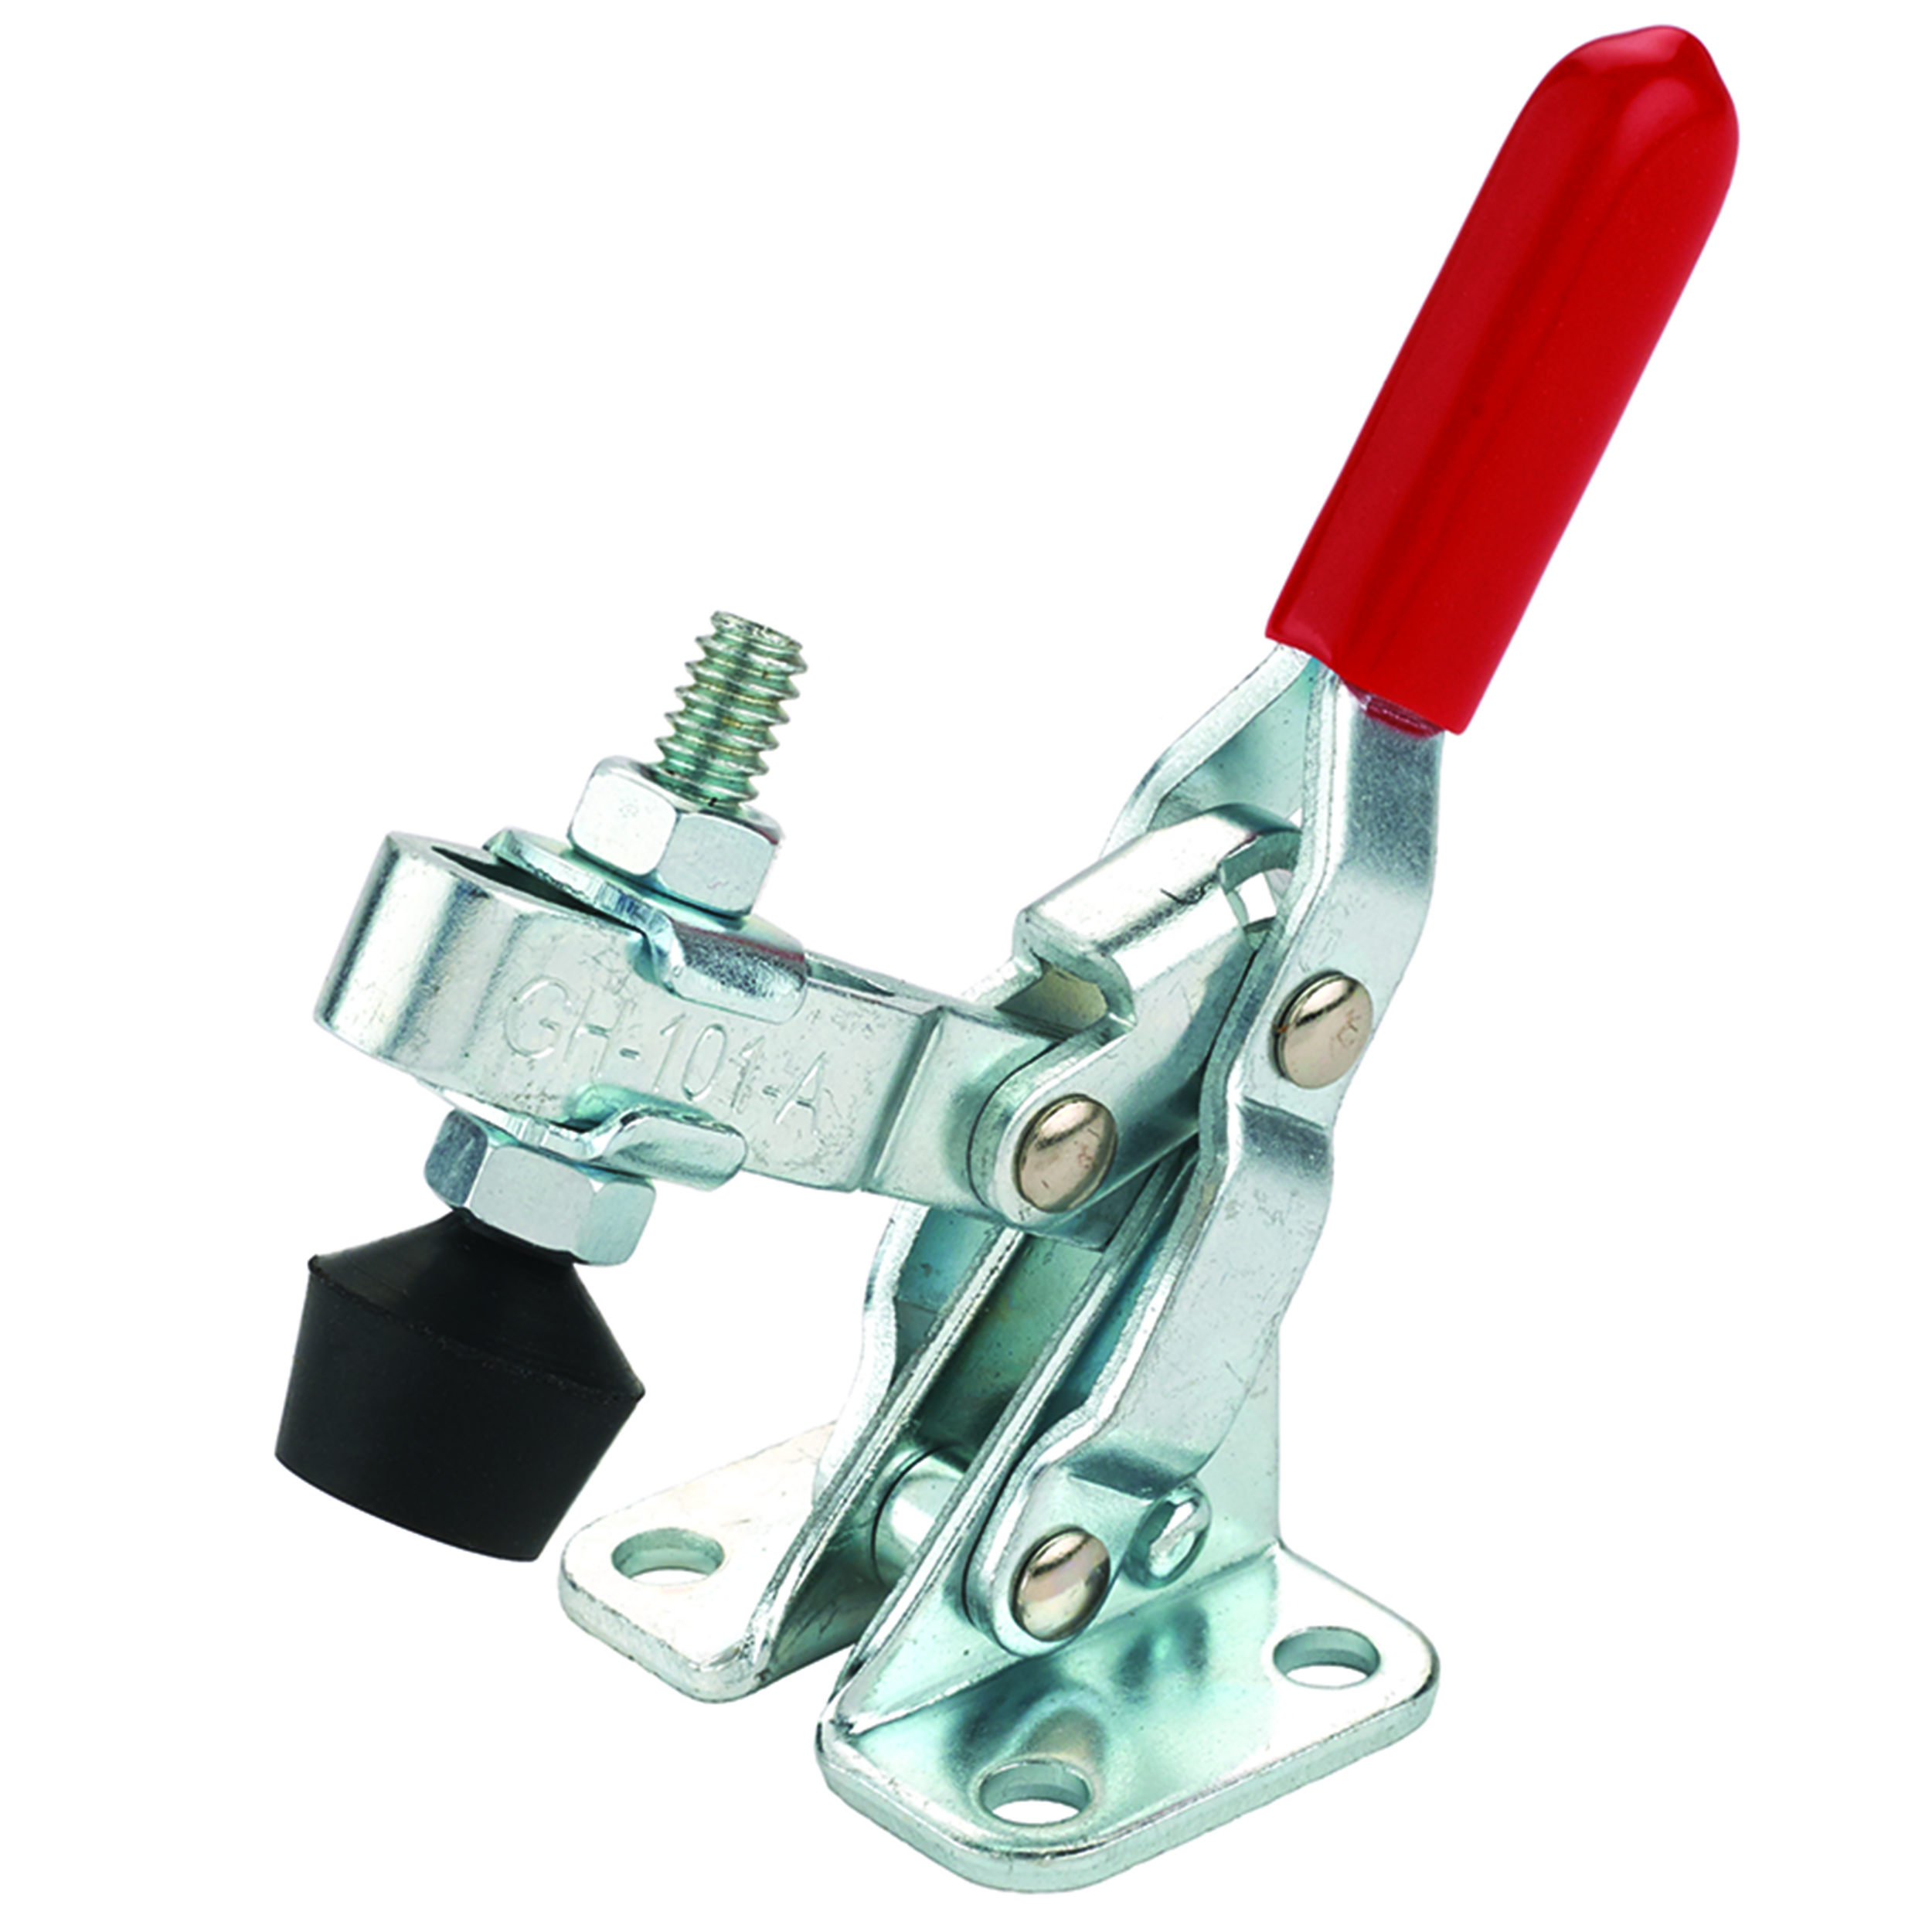 Vertical Handle Toggle Clamp, 2-1/8" X 3-1/8", 100 Lb. Capacity